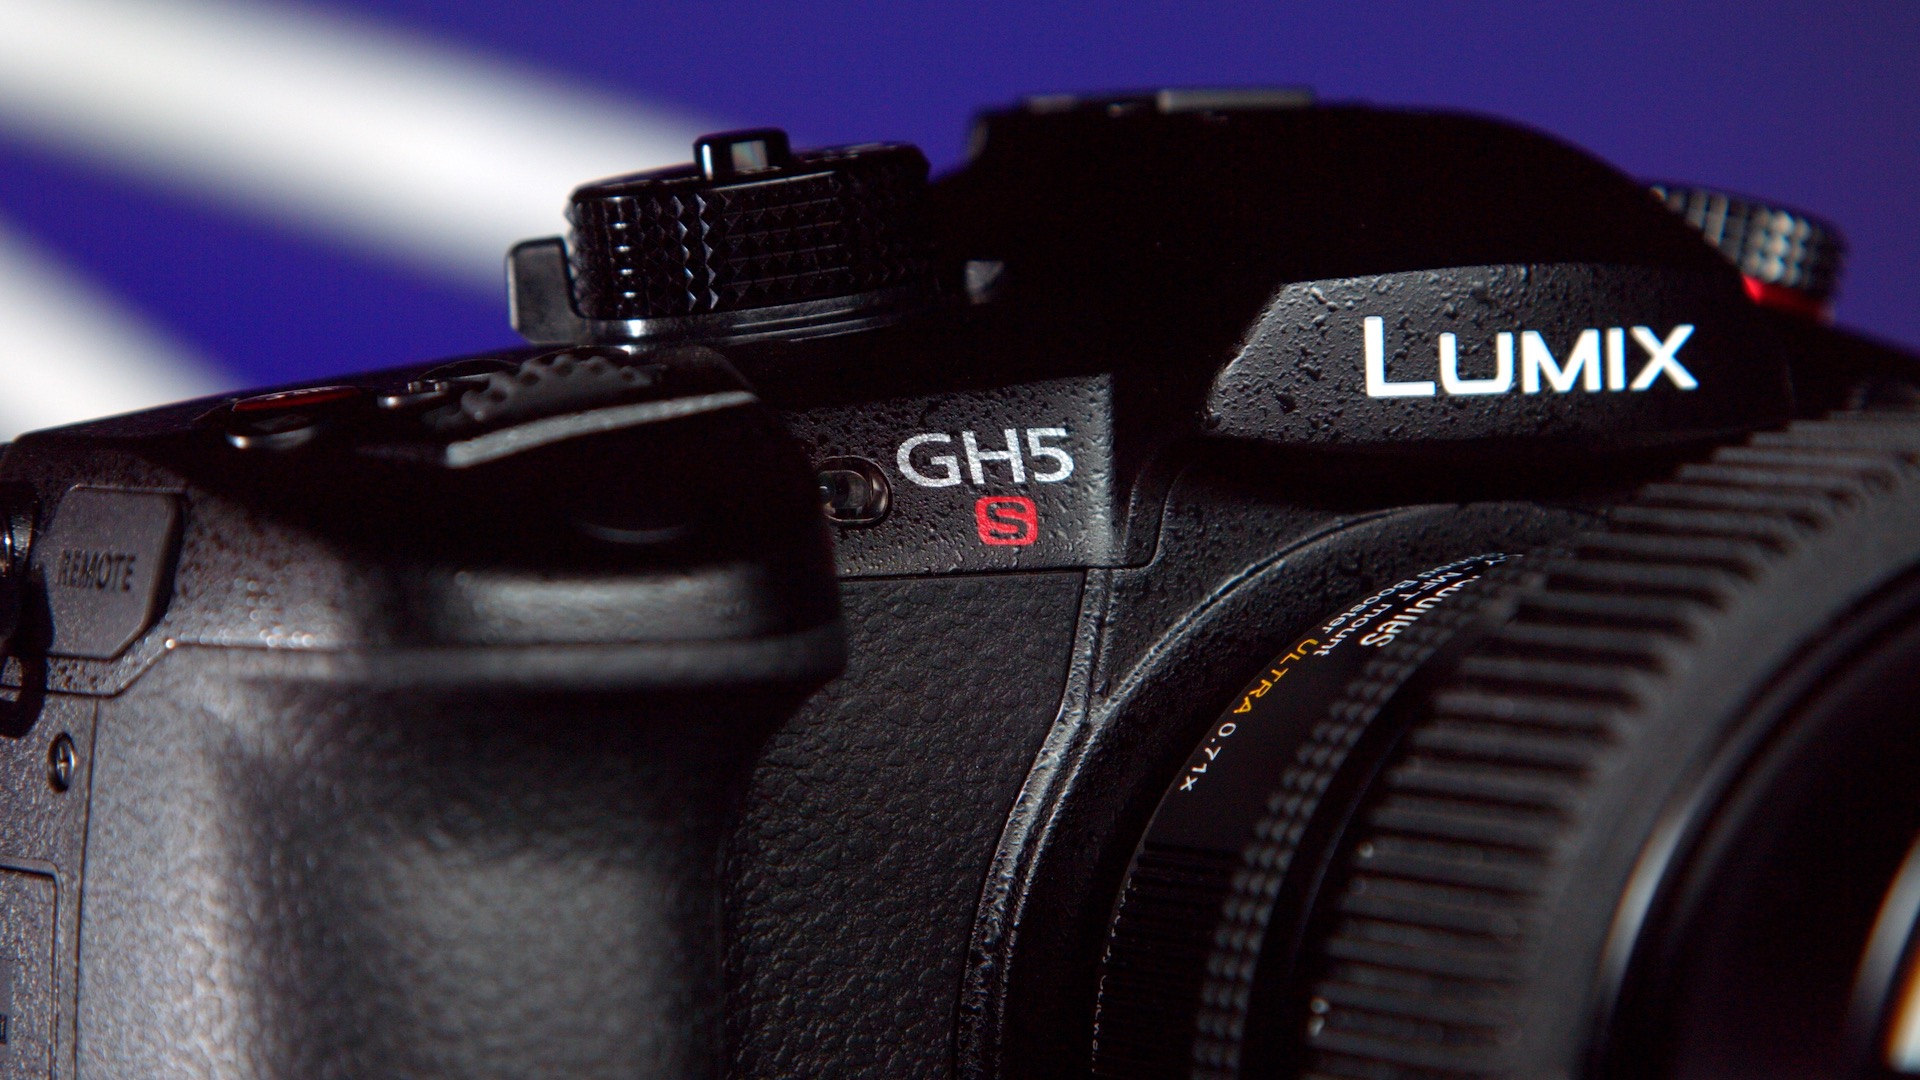 Recyclen Verplicht Panda Panasonic GH5S. The good, the bad and the clean - Newsshooter